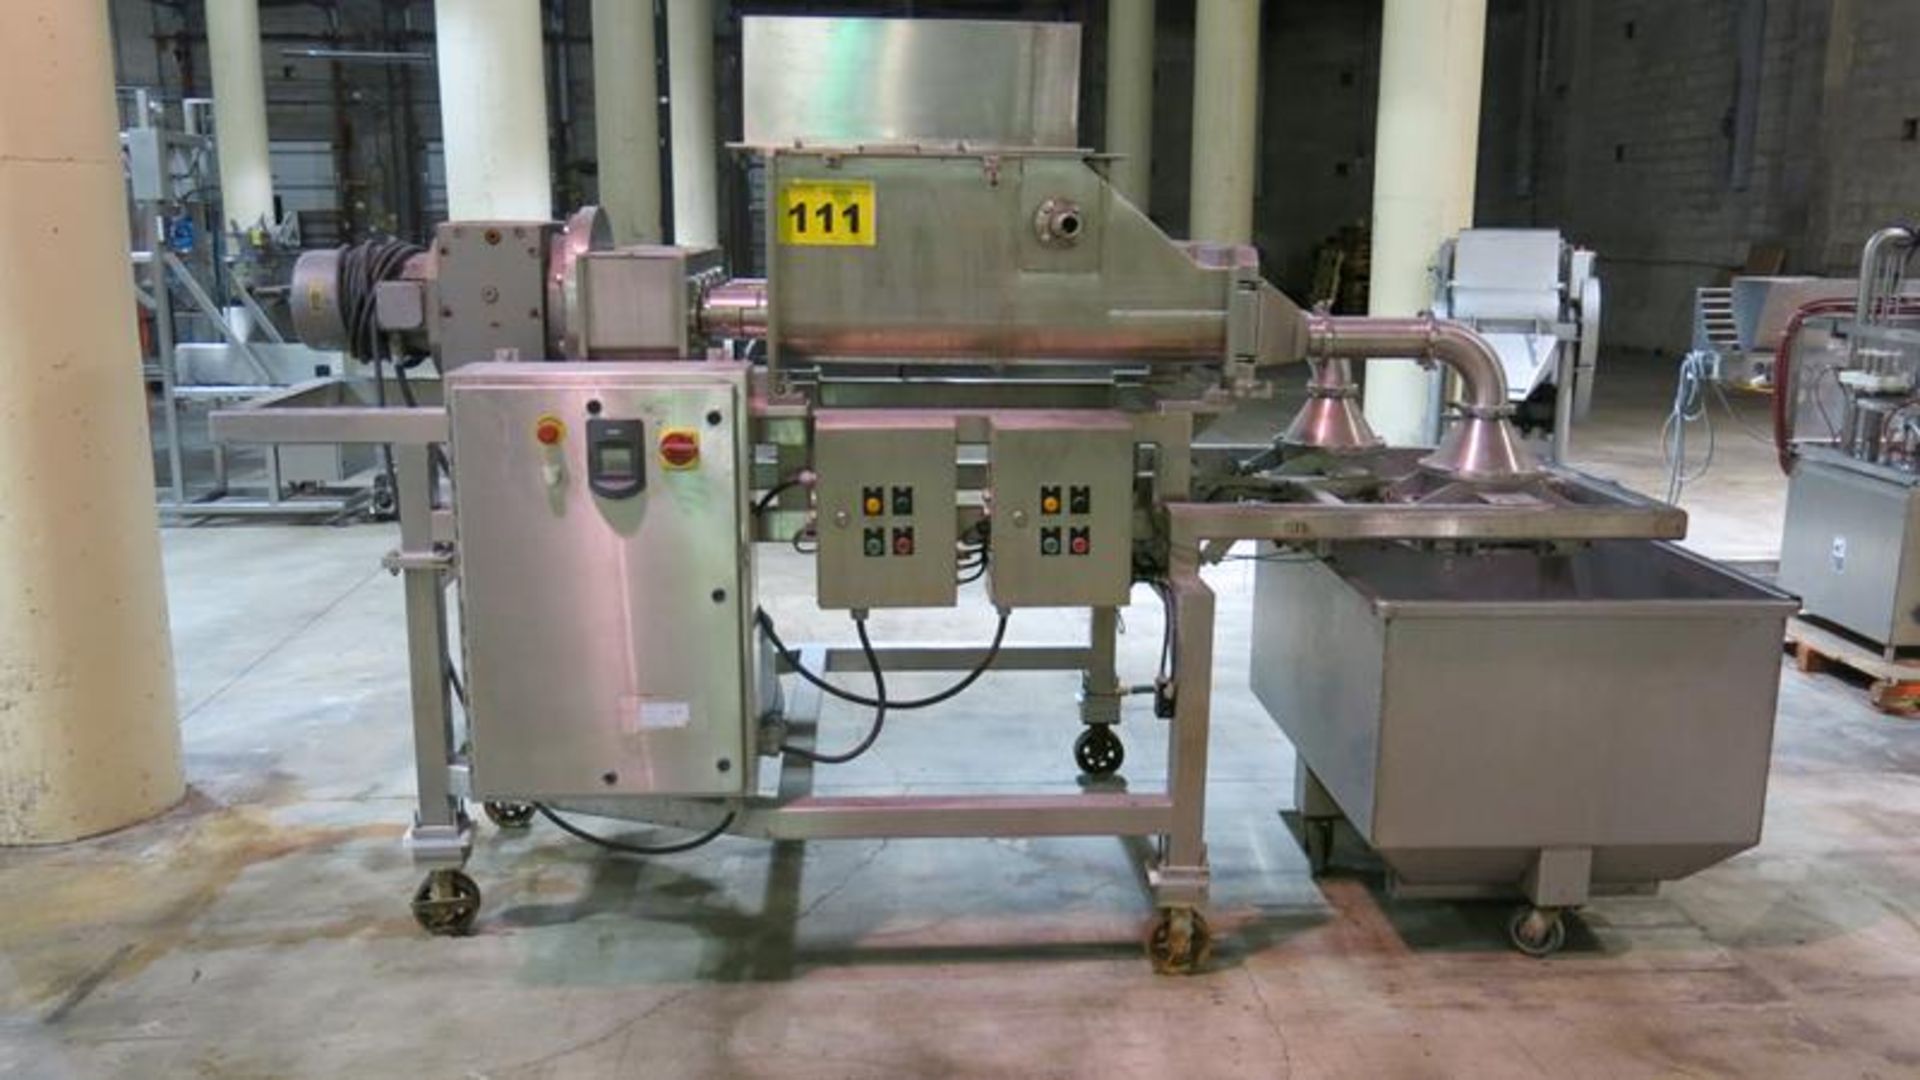 POLAR PROCESS, SUNNY CRUNCH, STAINLESS STEEL, 7.5 HP, FOUR SCREW, TWO HEAD, EXTRUDER, 32" X 29" X - Image 10 of 10